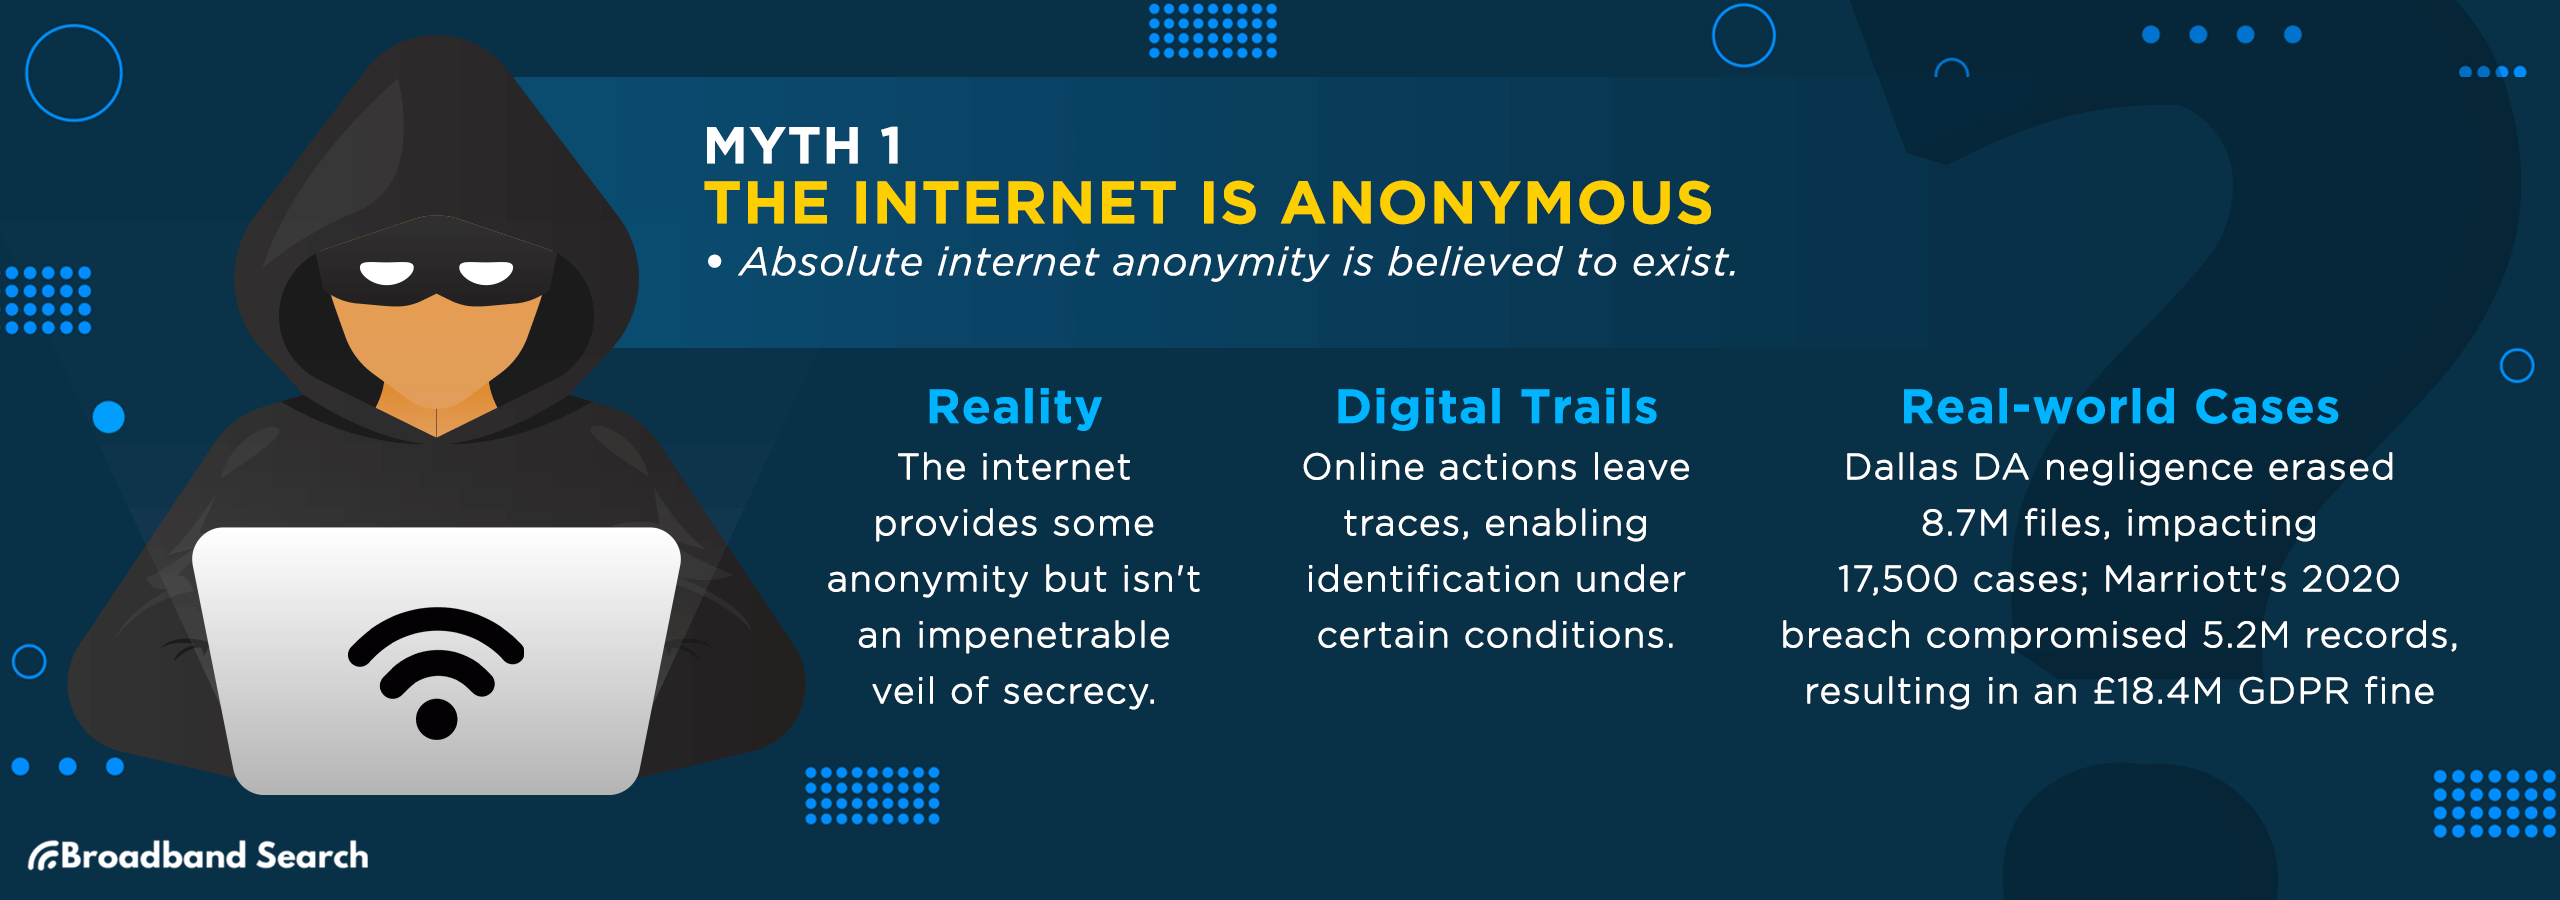 the first internet myth, the internet is anonymous. The reality, digital trails, and real-world cases